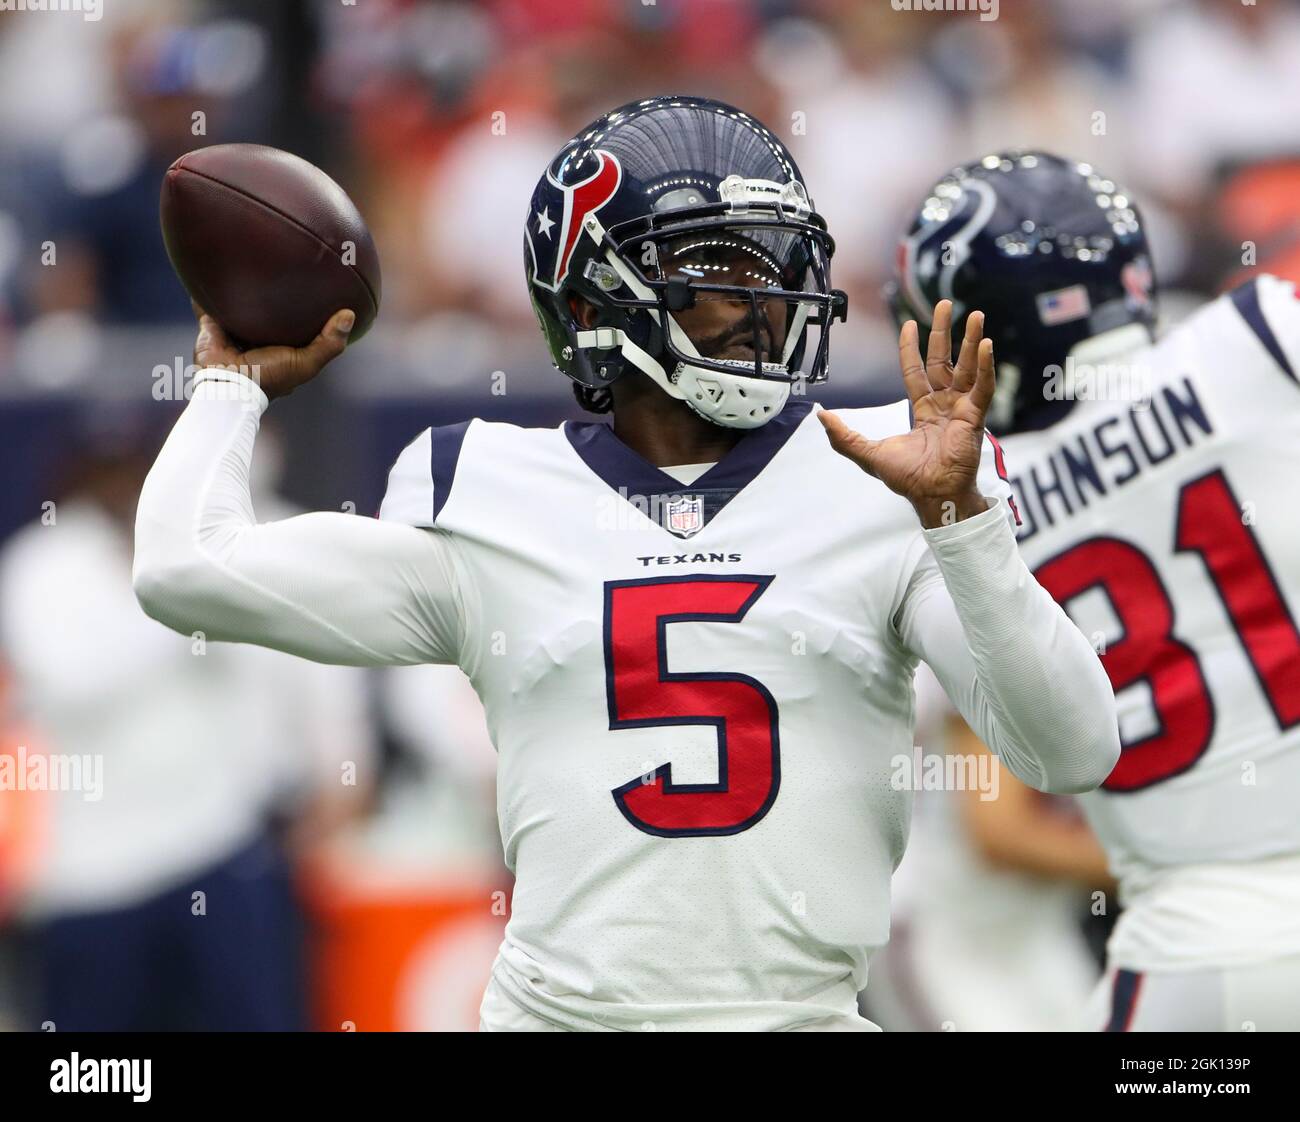 Houston, Texas, USA. September 12, 2021: Houston Texans quarterback Tyrod Taylor (5) passes the ball during the first half of an NFL game between the Houston Texans and the Jacksonville Jaguars on September 12, 2021 in Houston, Texas. (Credit Image: © Scott Coleman/ZUMA Press Wire) Credit: ZUMA Press, Inc./Alamy Live News Stock Photo